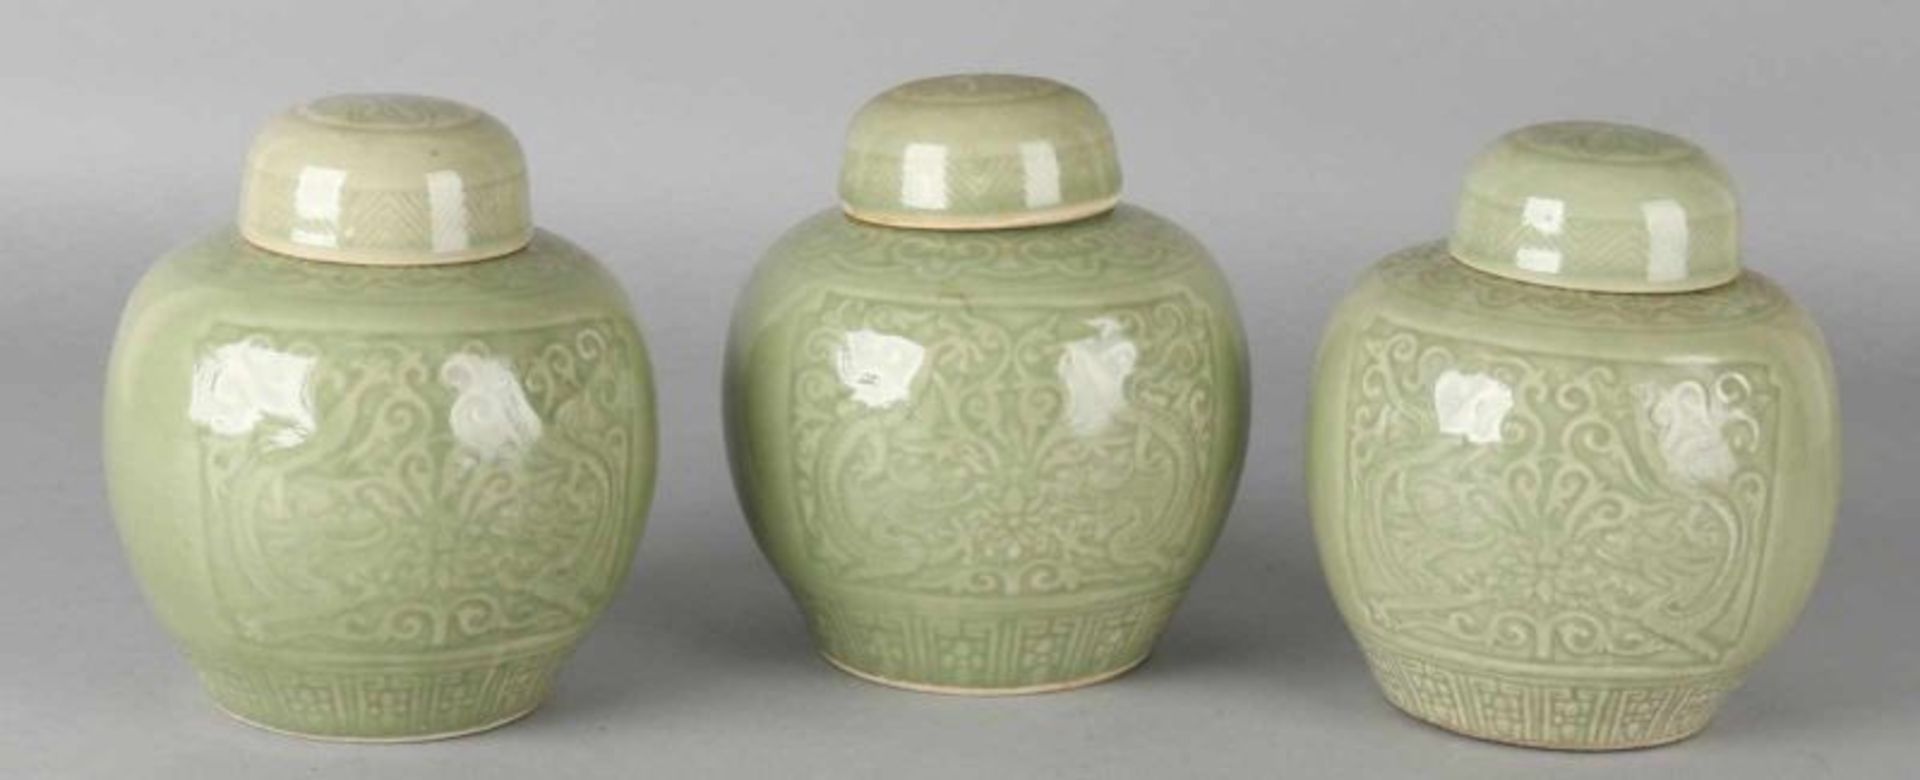 Three old Chinese celadon porcelain processed ginger pots. 20th century. Dimensions: 15 x 12.5 cm ø.